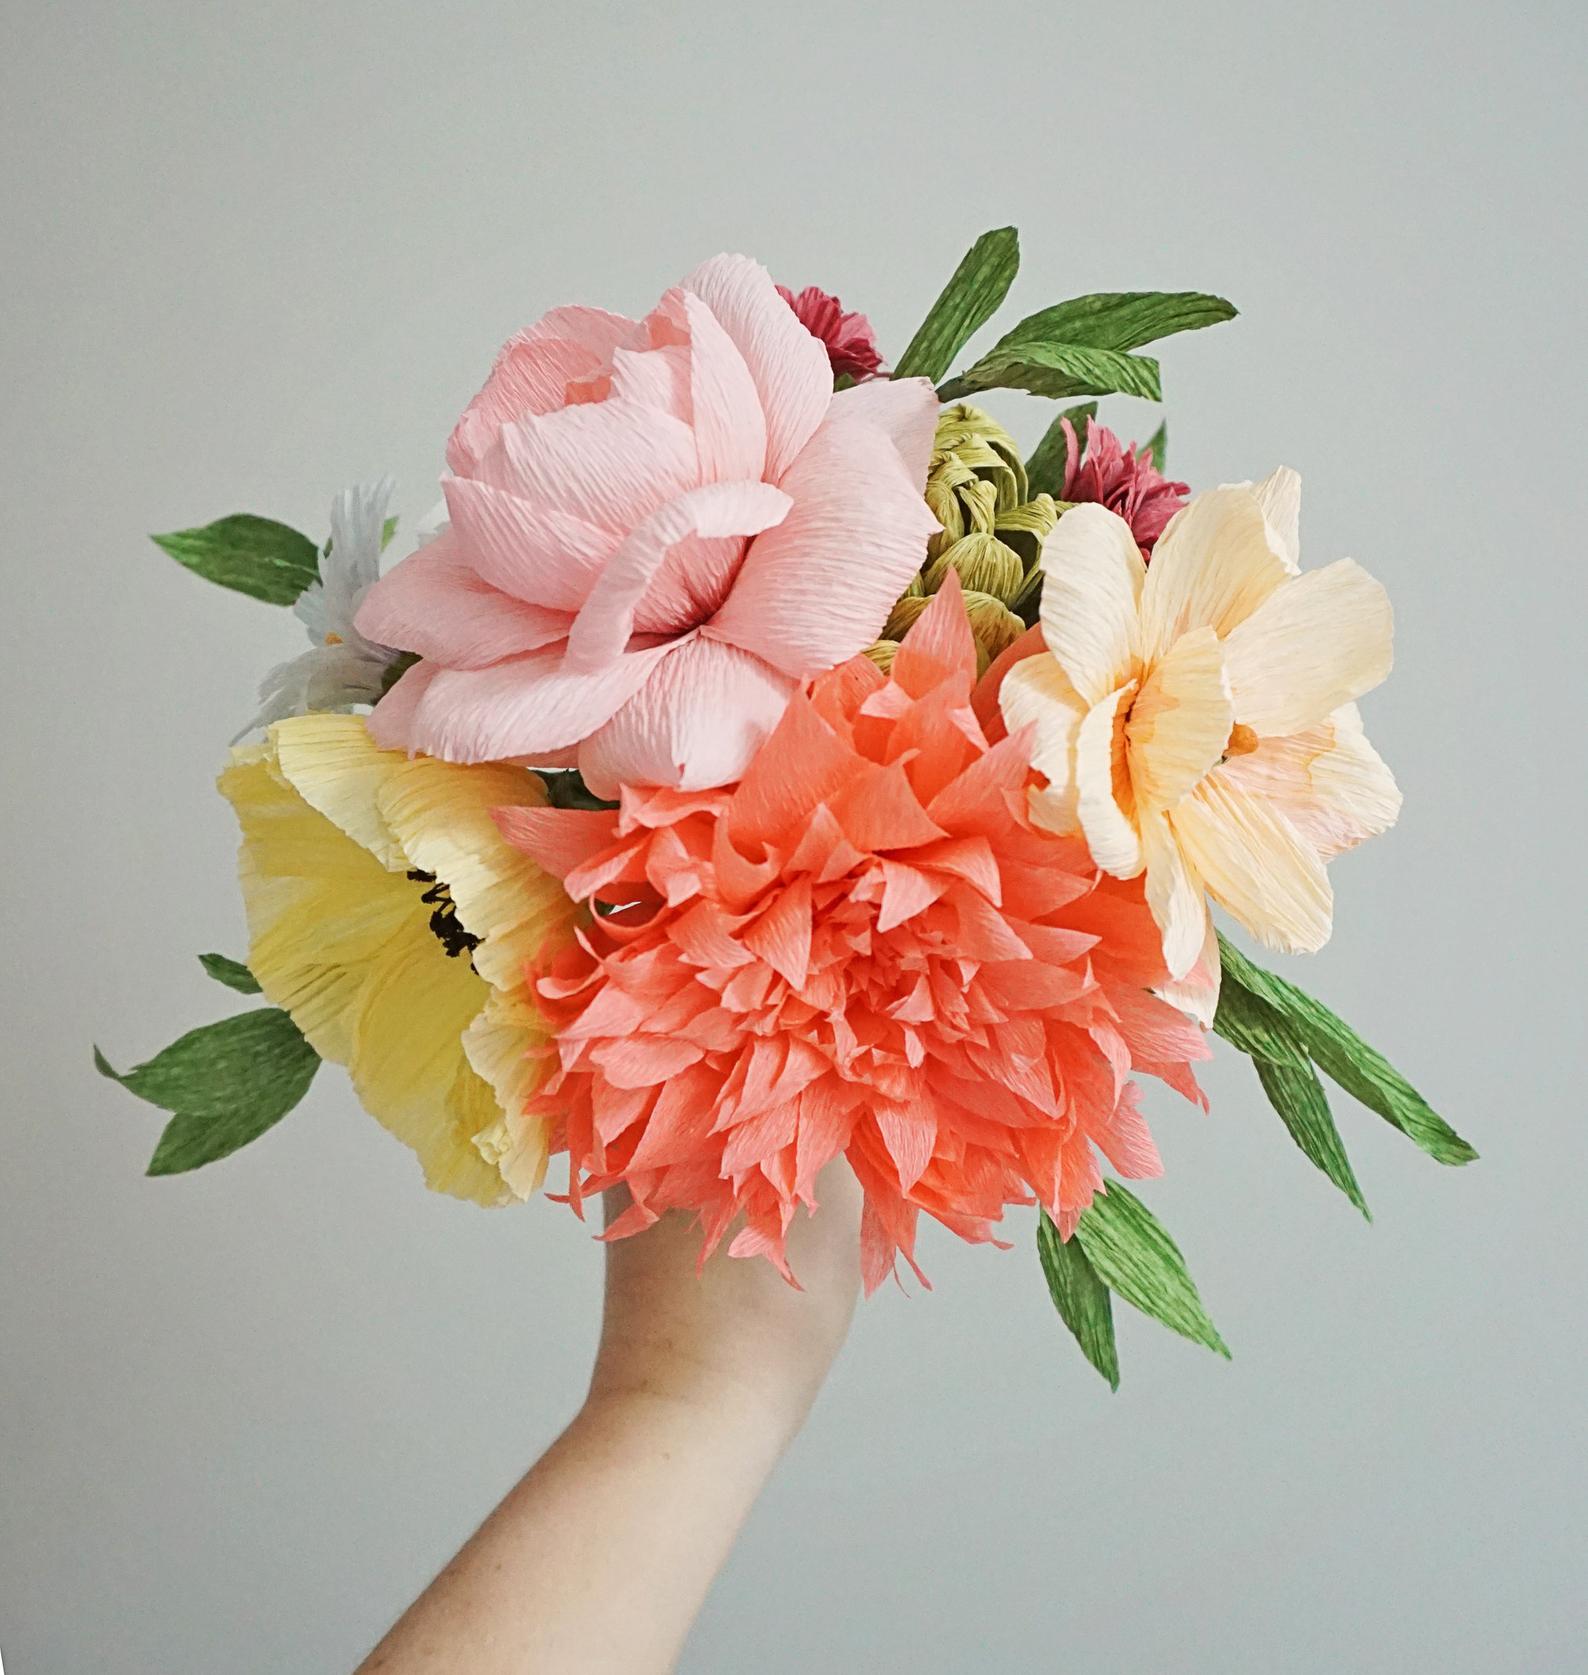 Crepe paper flower bouquet stock photo. Image of present - 111616148